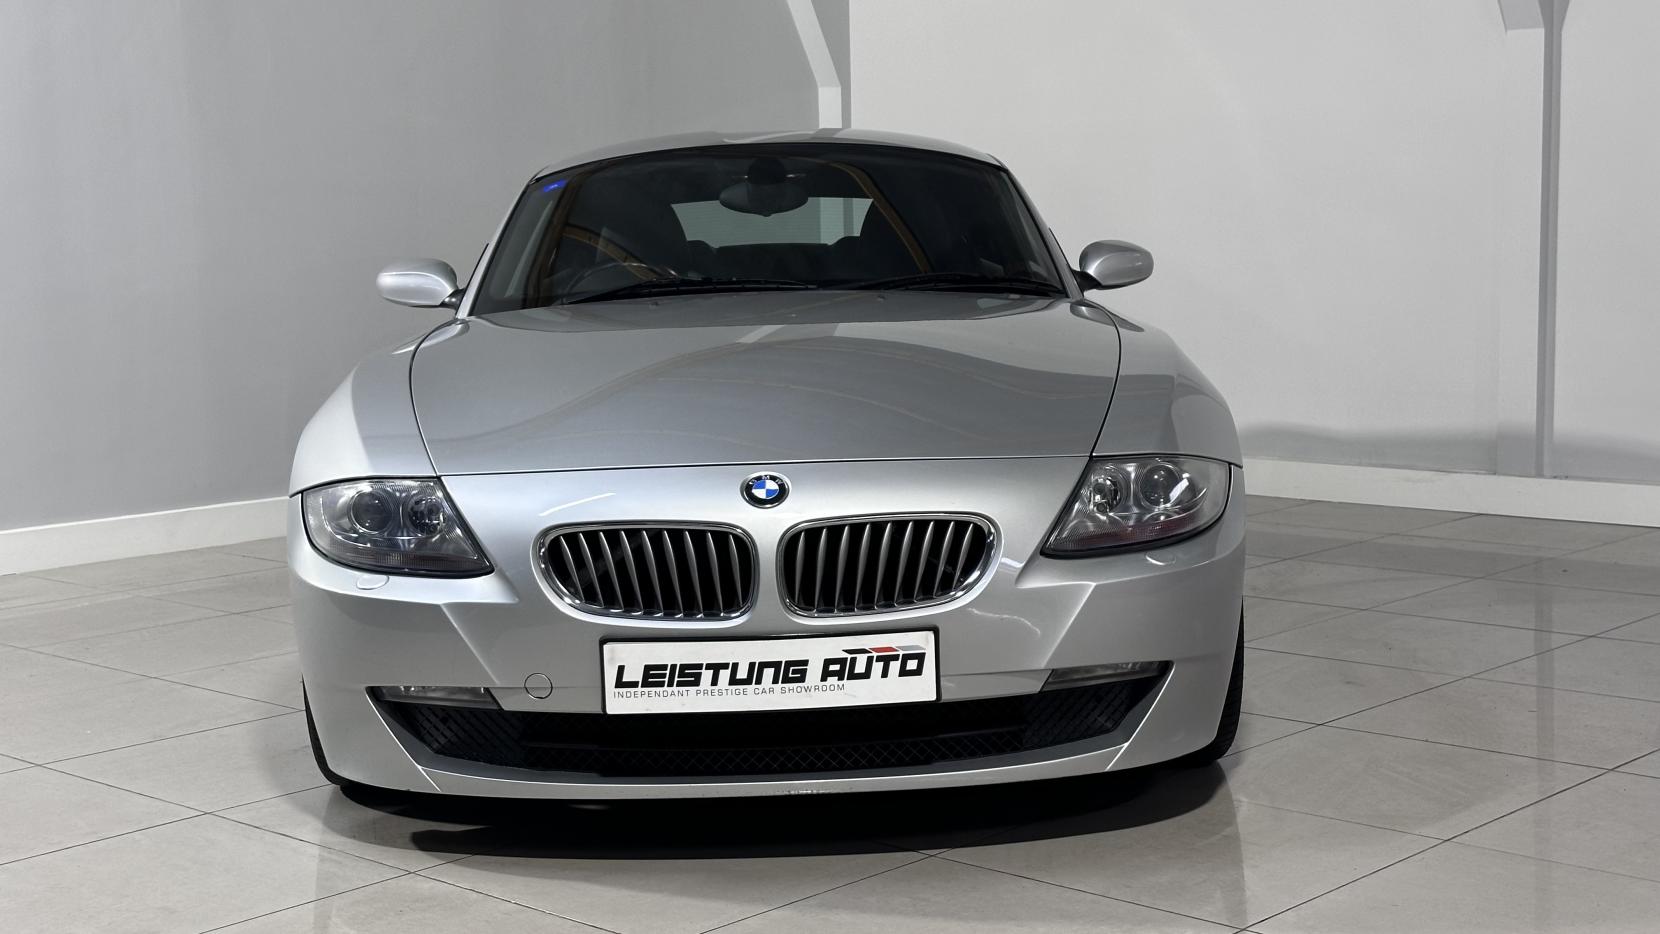 BMW Z4 3.0 si Sport Coupe 2dr Petrol Auto Euro 4 (265 ps)